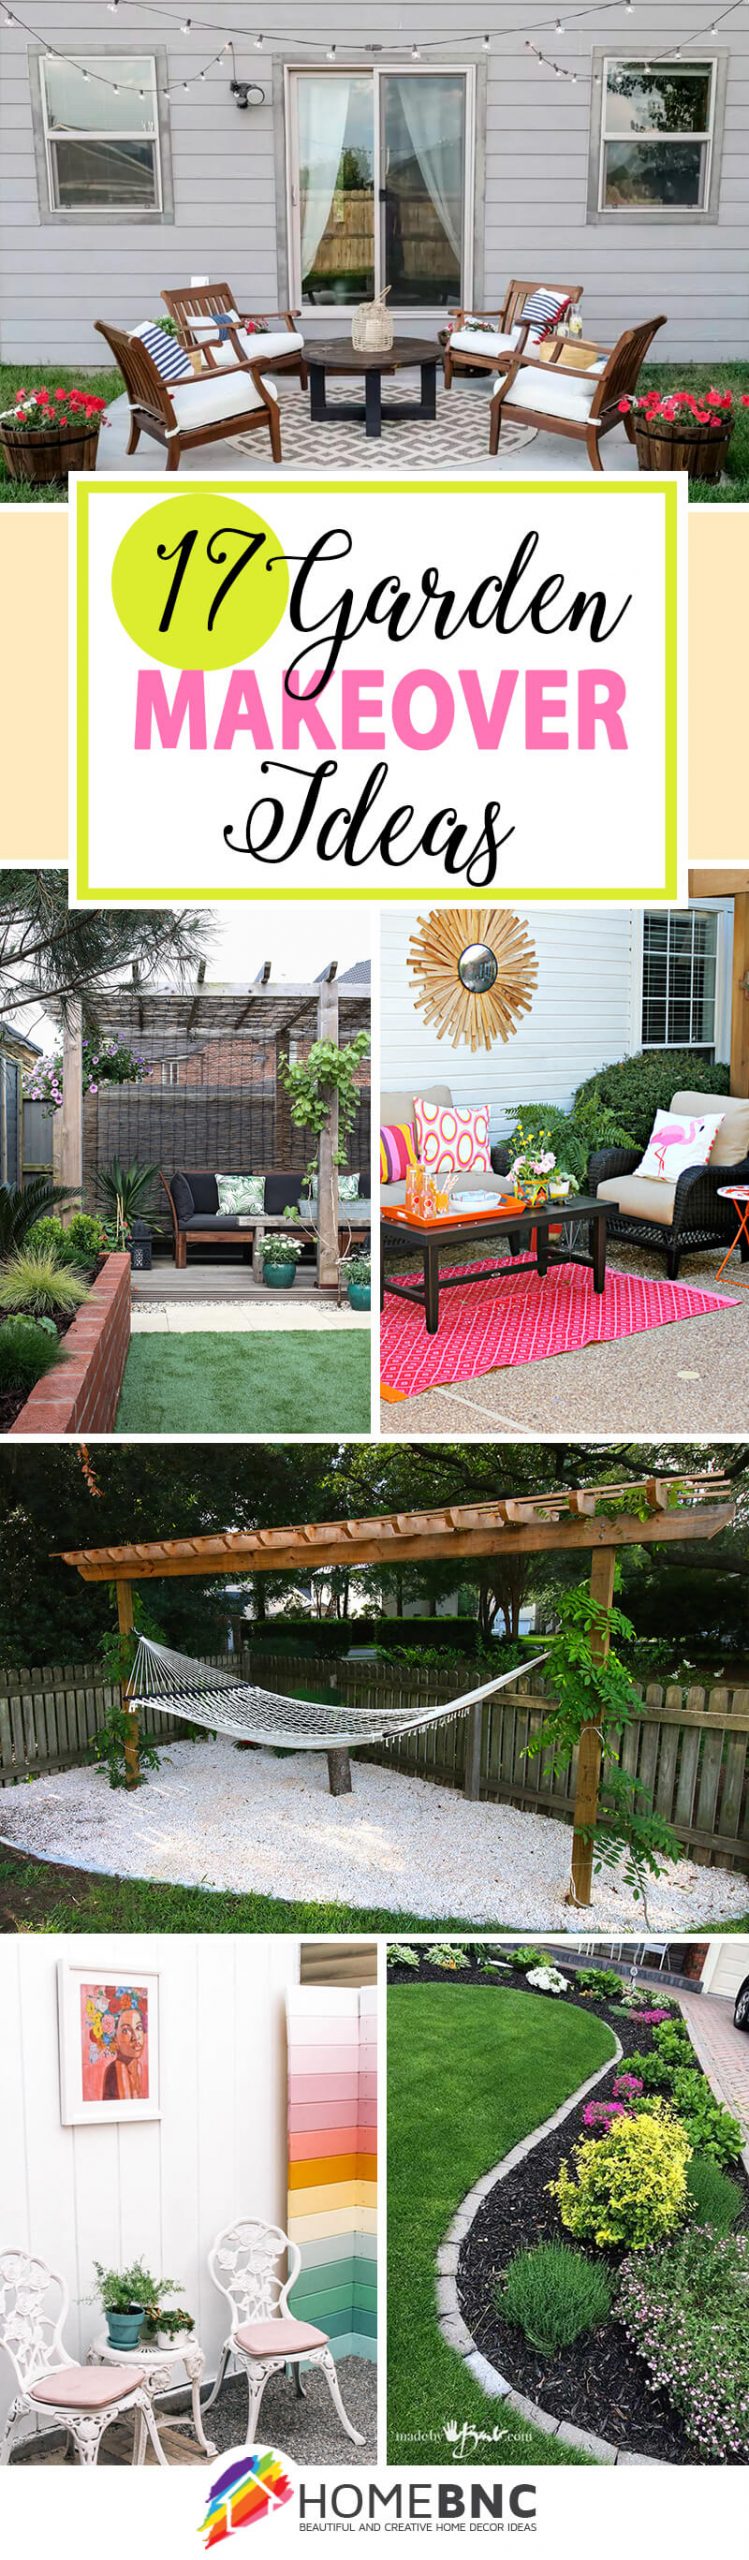 18 Best Garden Makeover Ideas to Bring Life to Your Backyard in 18